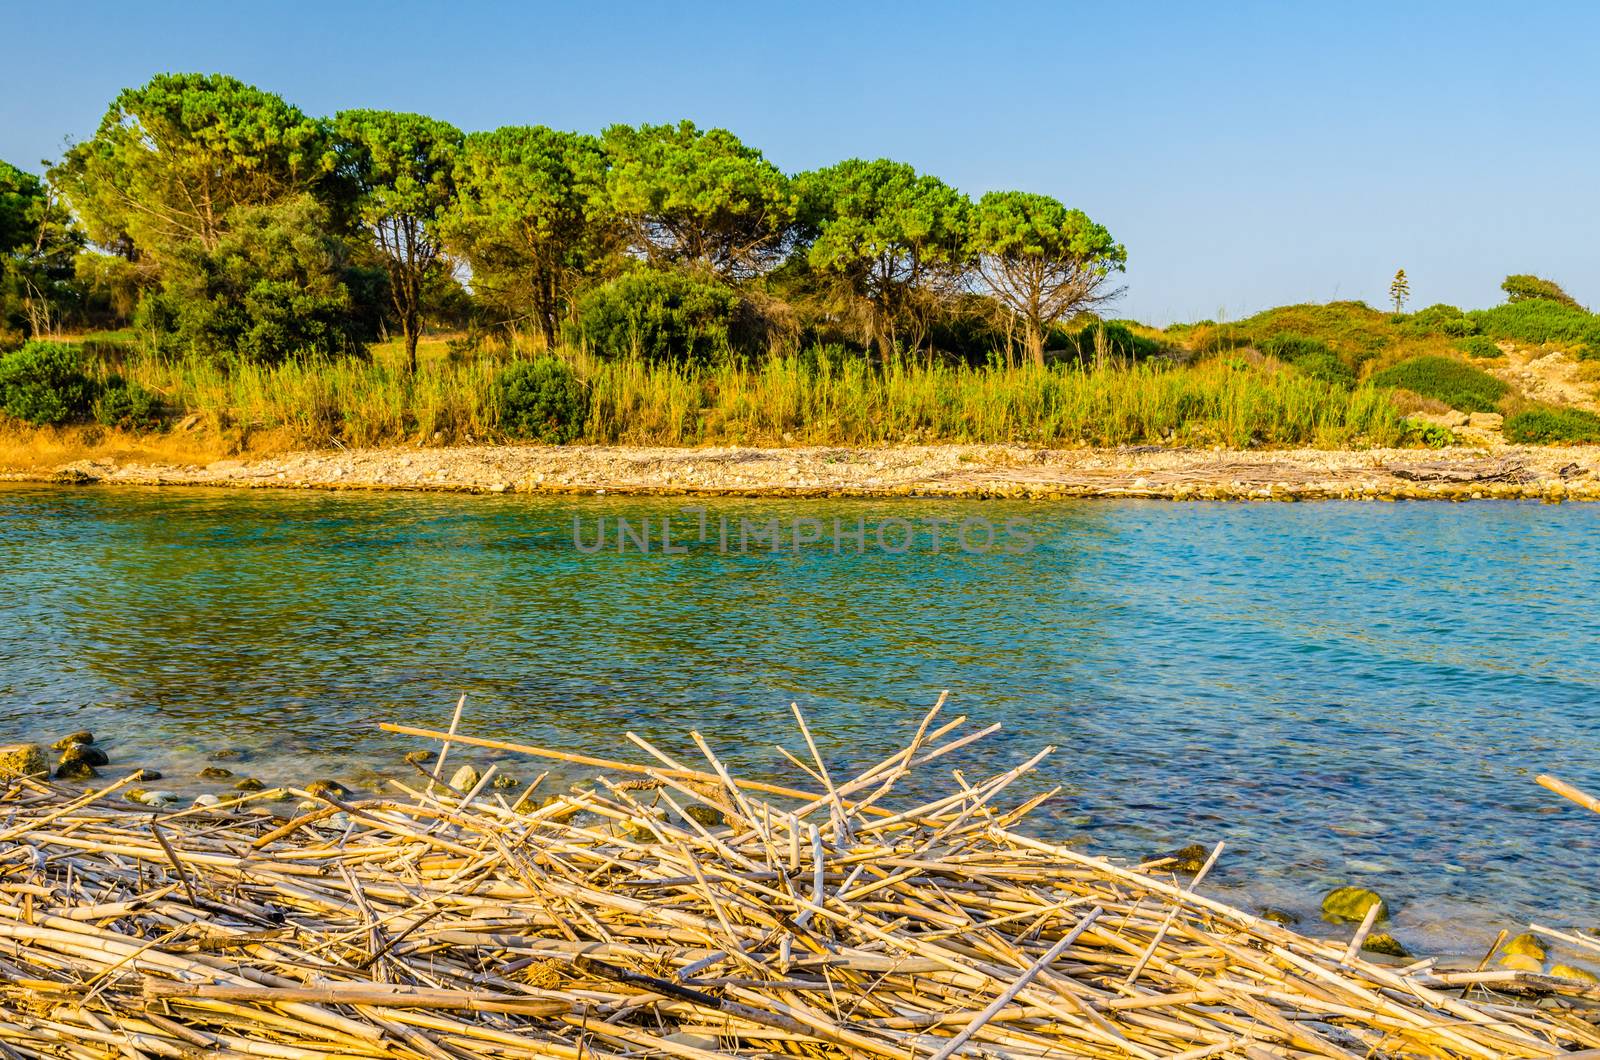 Cassibile river mouth next to Gelsomineto beach, Sicily, Italy by mauricallari